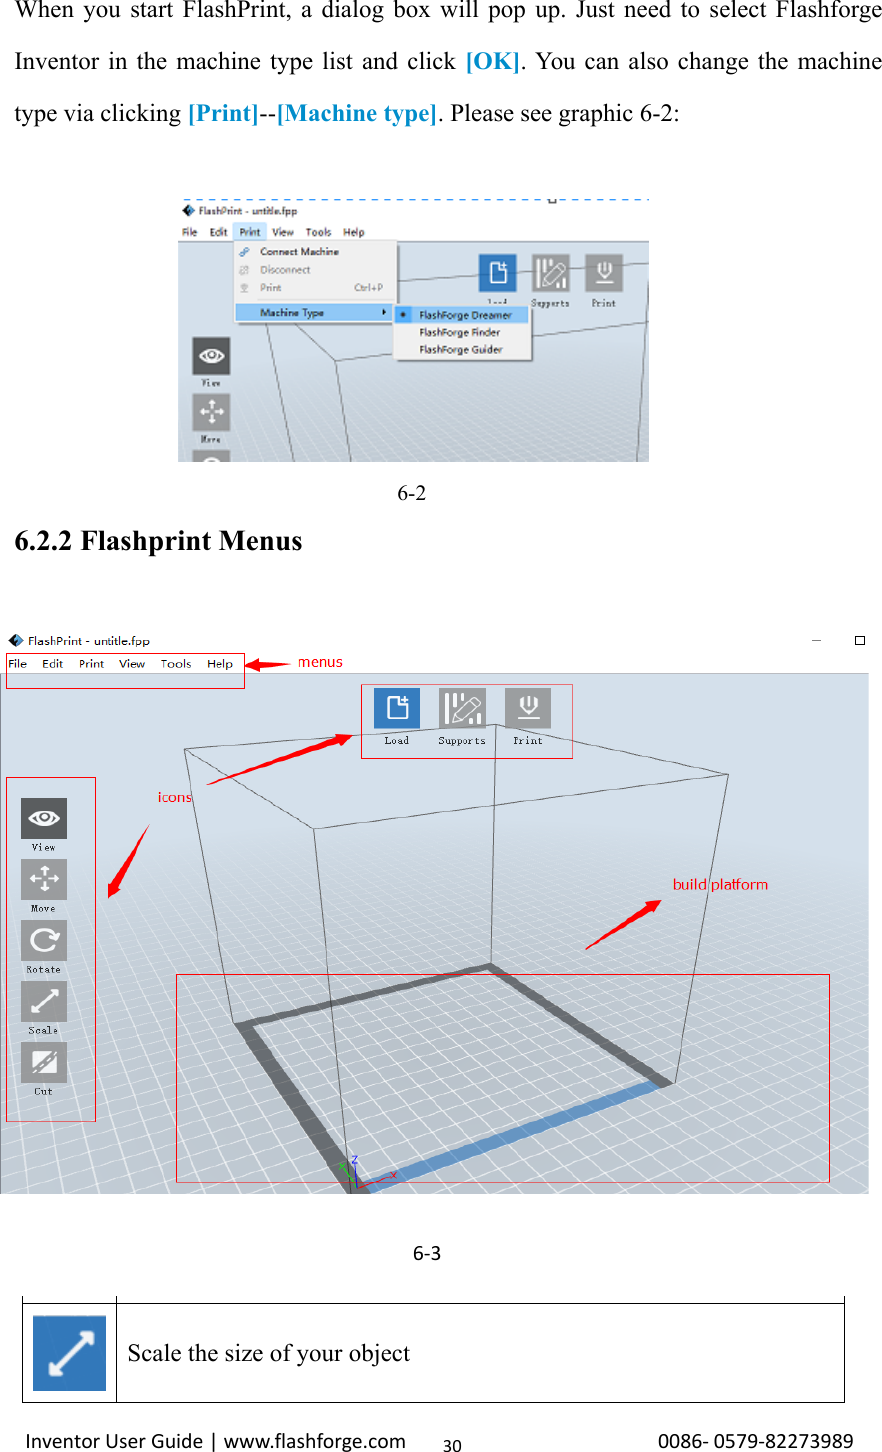 Inventor User Guide | www.flashforge.com 0086‐0579‐8227398930When you start FlashPrint, a dialog box will pop up. Just need to select FlashforgeInventor in the machine type list and click [OK]. You can also change the machinetype via clicking [Print]--[Machine type]. Please see graphic 6-2:6-26.2.2 Flashprint MenusLoad one or multiple files.Enter the support edit modeView FlashPrint home screen from one of six viewing angles.Move model around on xy-plane; shift+click to move along z axisTurn and rotate your modelScale the size of your object6‐3